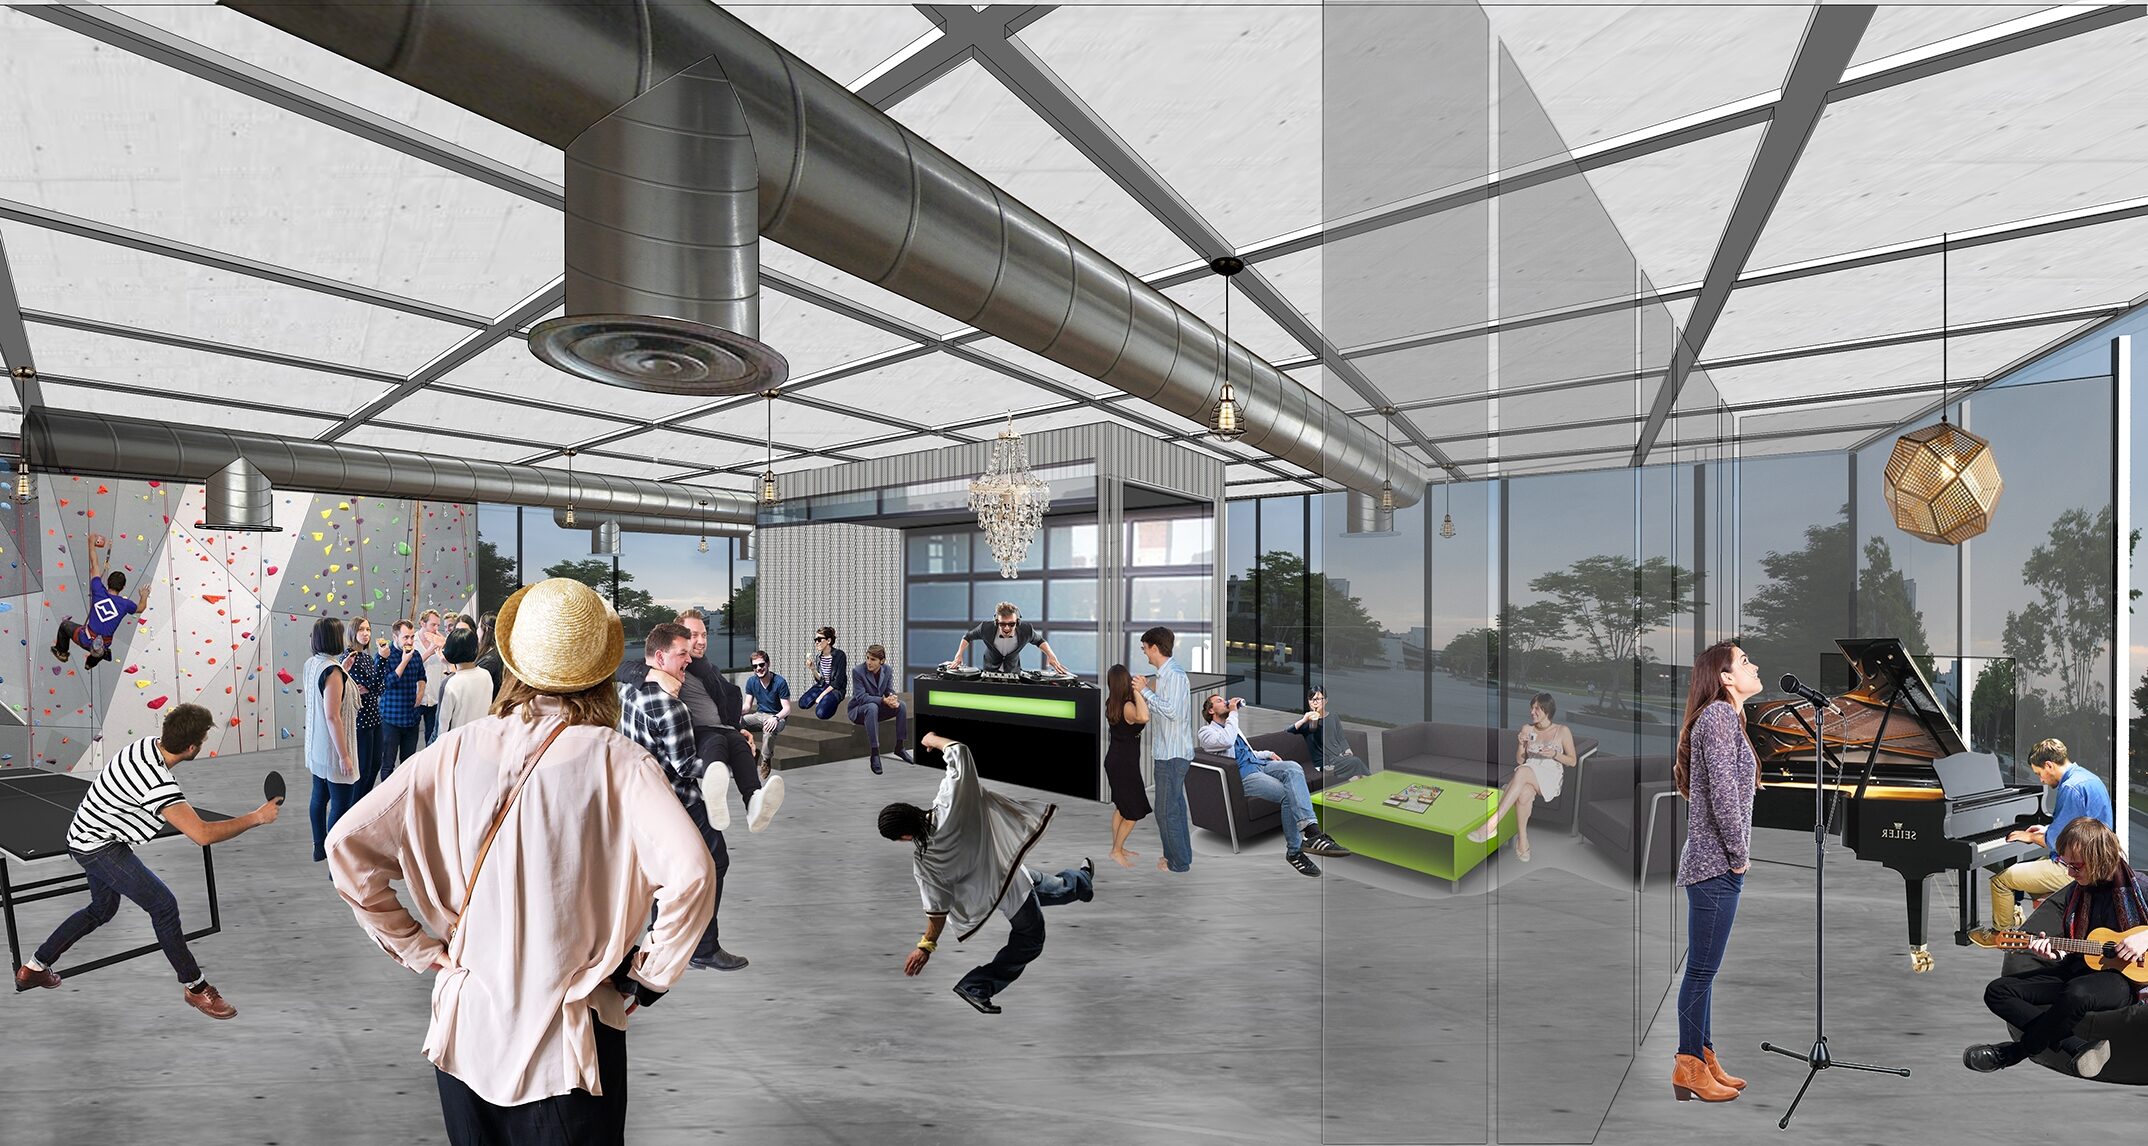 The design for this community college “flex lab” creates an amenity that acts as an incubator/makerspace/coffee shop by day, but transforms into a social gathering area complete with a climbing wall, DJ Booth, and concert space at night.